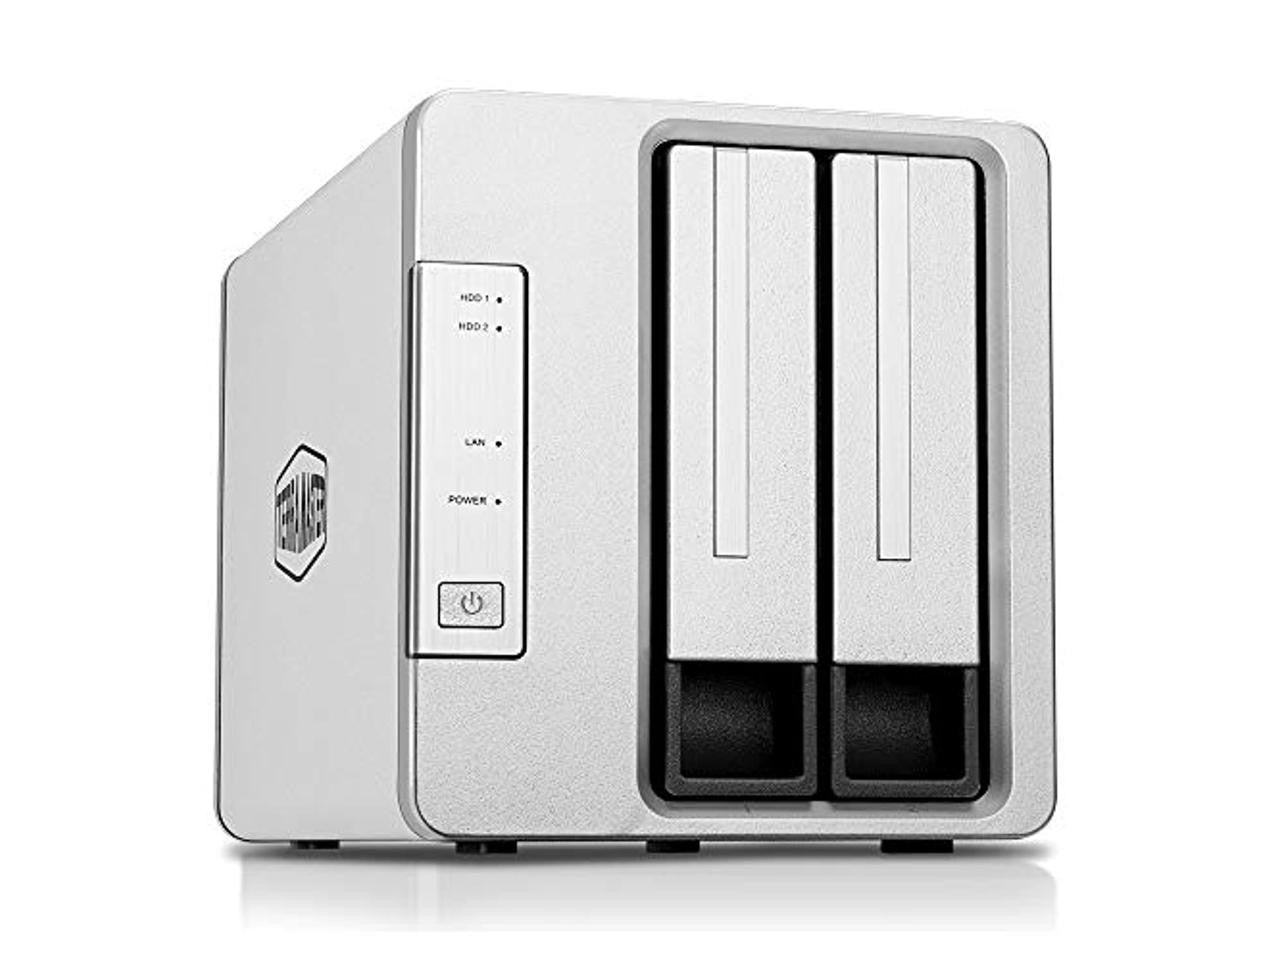 TerraMaster F2-210 2-Bay Home NAS with 24TB (2 x 14TB) of Western Digital Red Plus Drives Fully Assembled and Tested